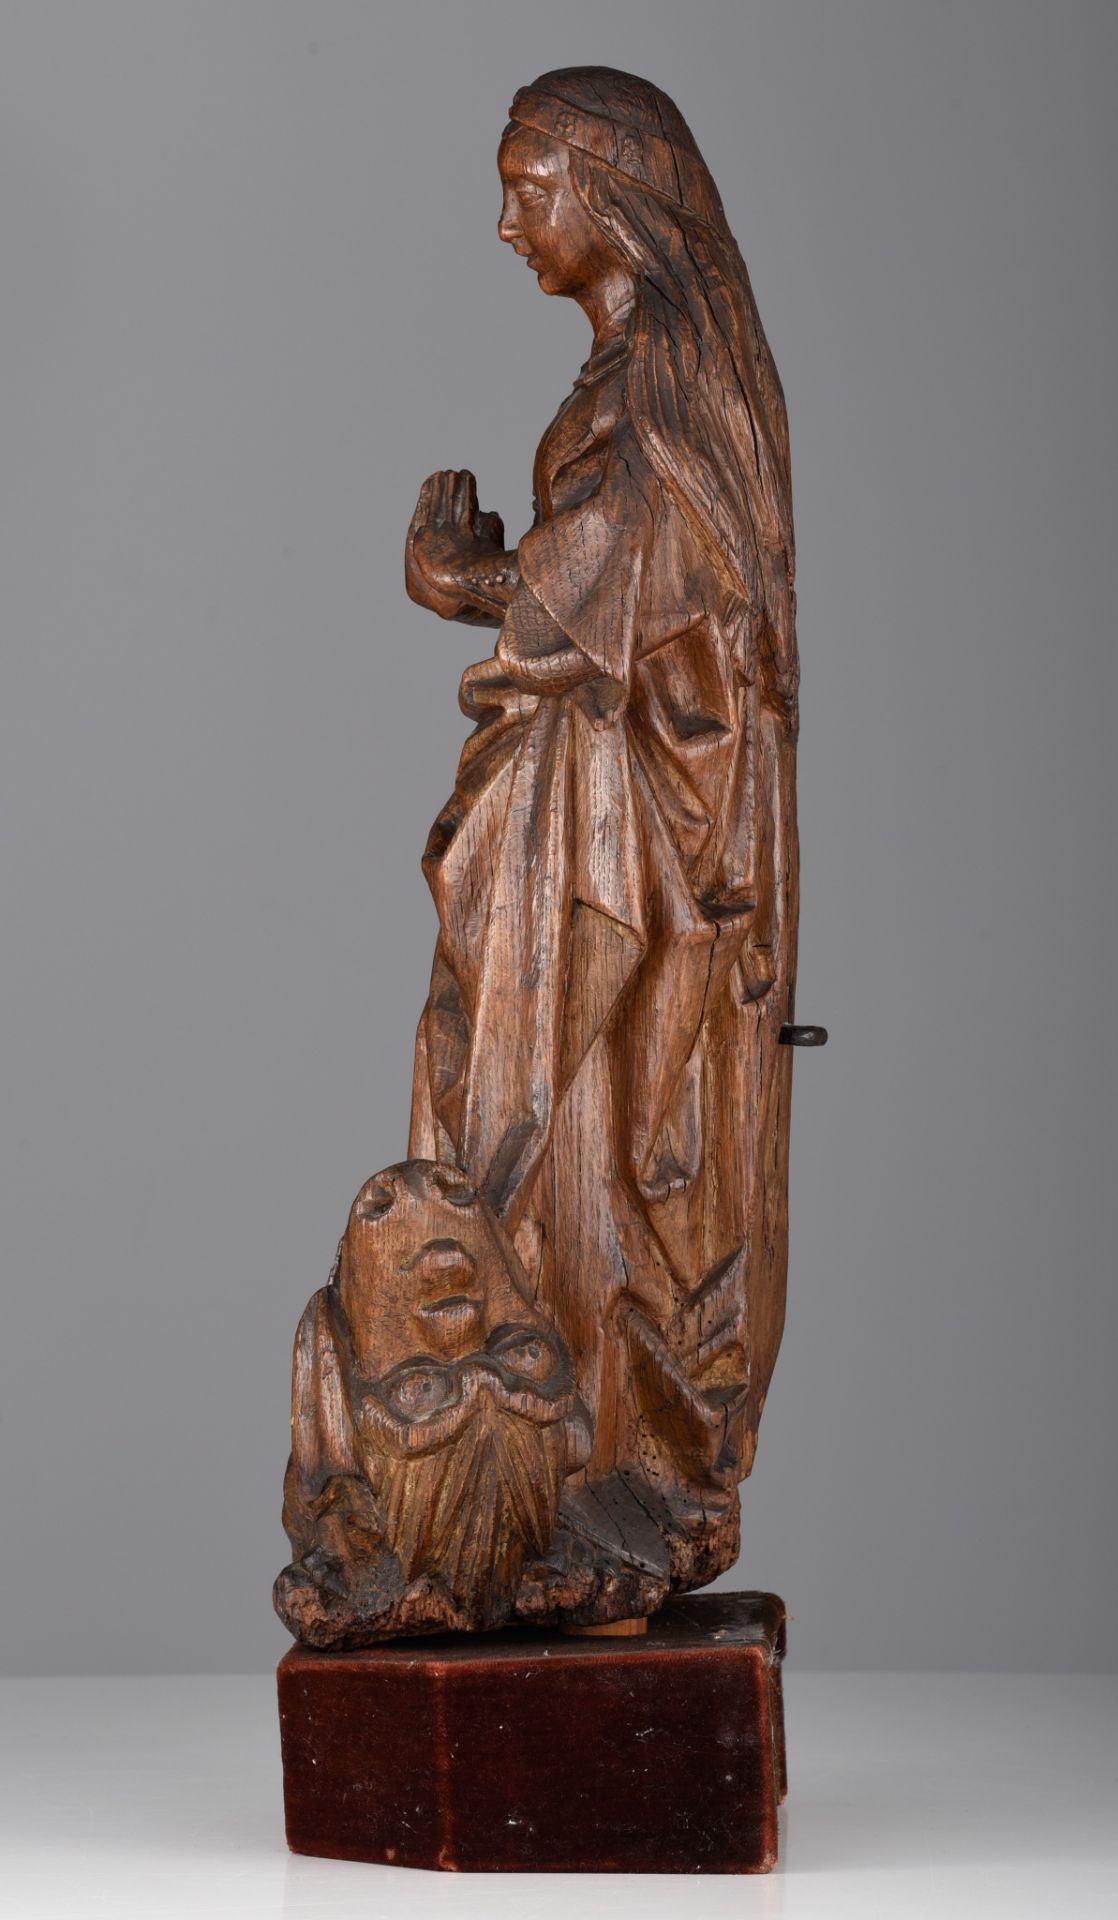 A fine oak sculpture of Saint Margaret and the dragon, 16thC, the Southern Netherlands, H 61 cm - Image 4 of 9